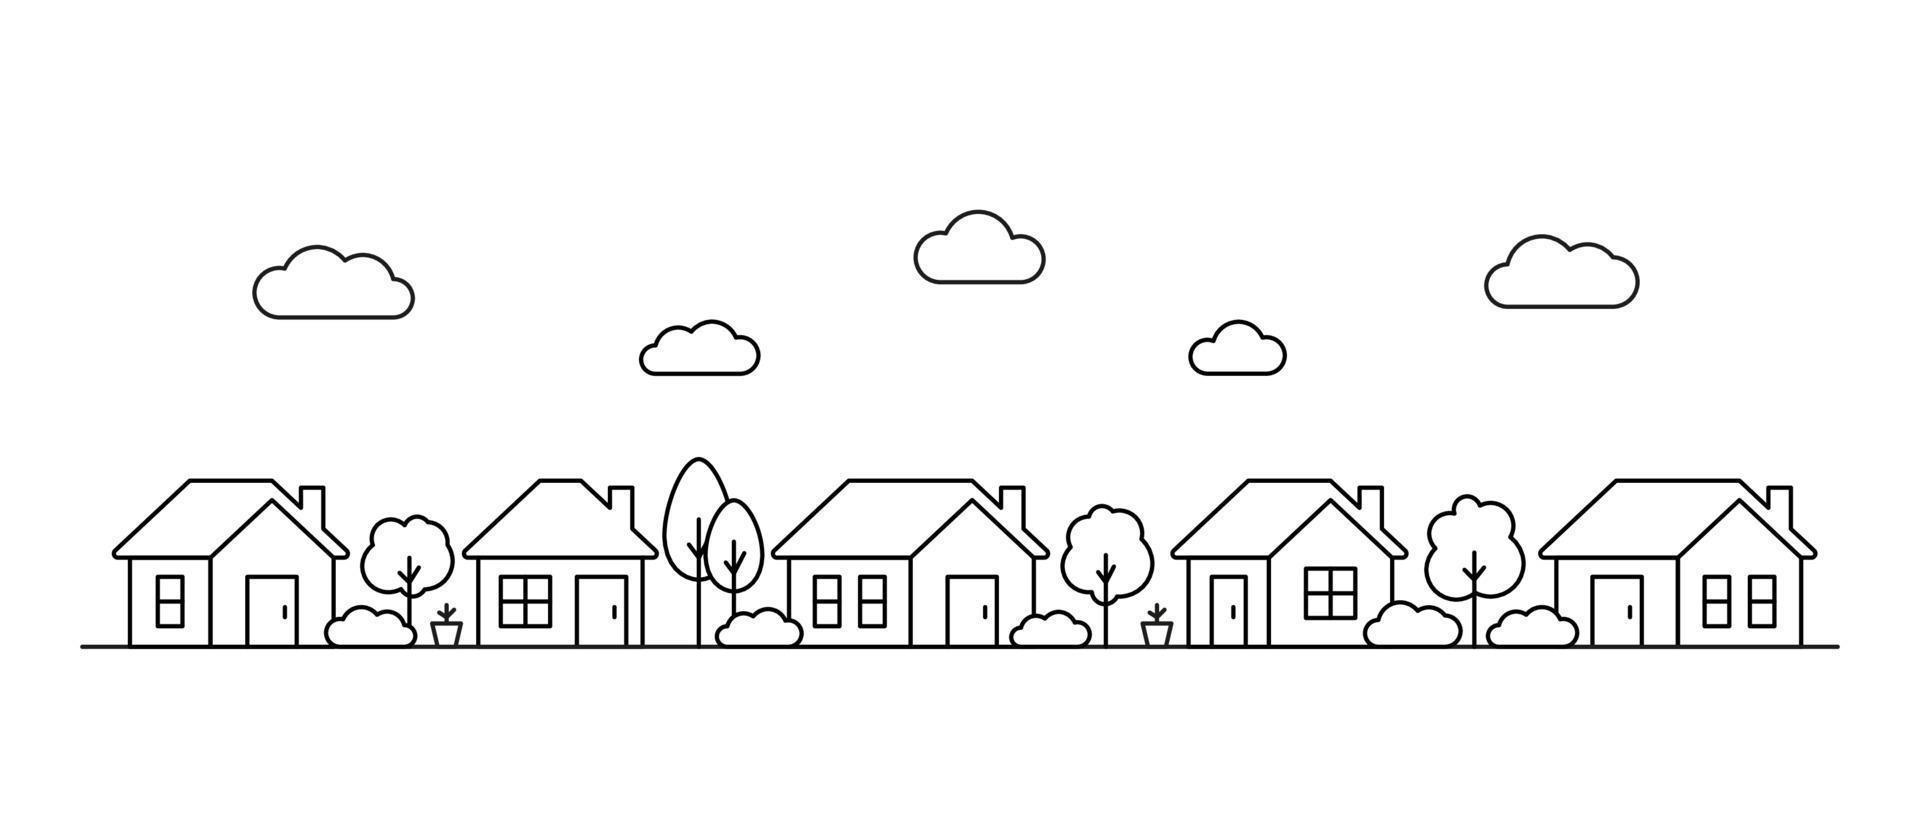 Neighborhood small house, line art. Street building, real estate architecture, apartment. Facade home in country city landscape. Vector illustration